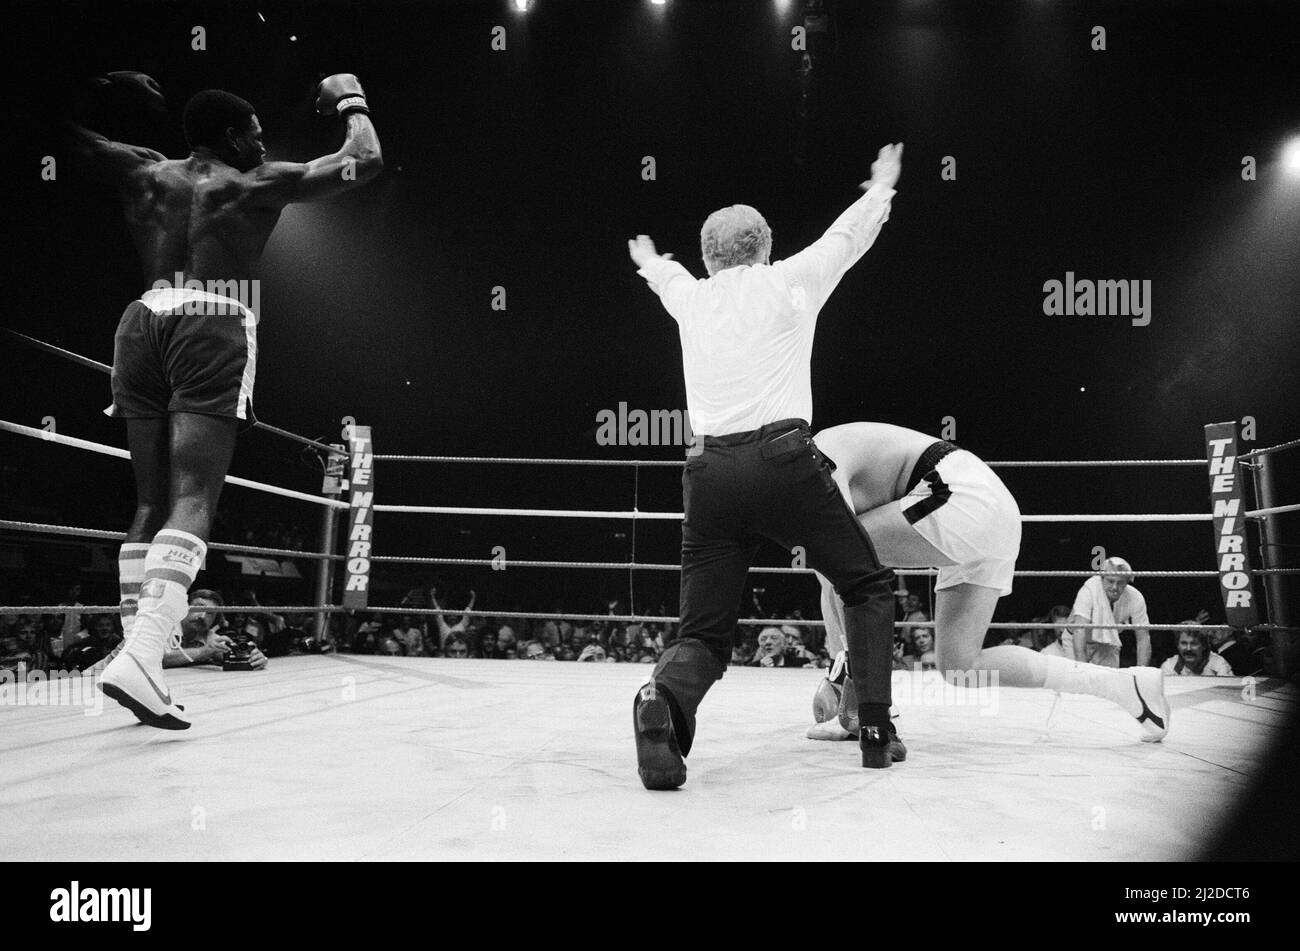 Frank Bruno vs. Anders Eklund for the European Heavyweight Title. Bruno knocked out Eklund in round four.(Picture) Bruno celebrates becoming European Heavyweight Champion as the referee counts Eklund out. 1st October 1985 Stock Photo